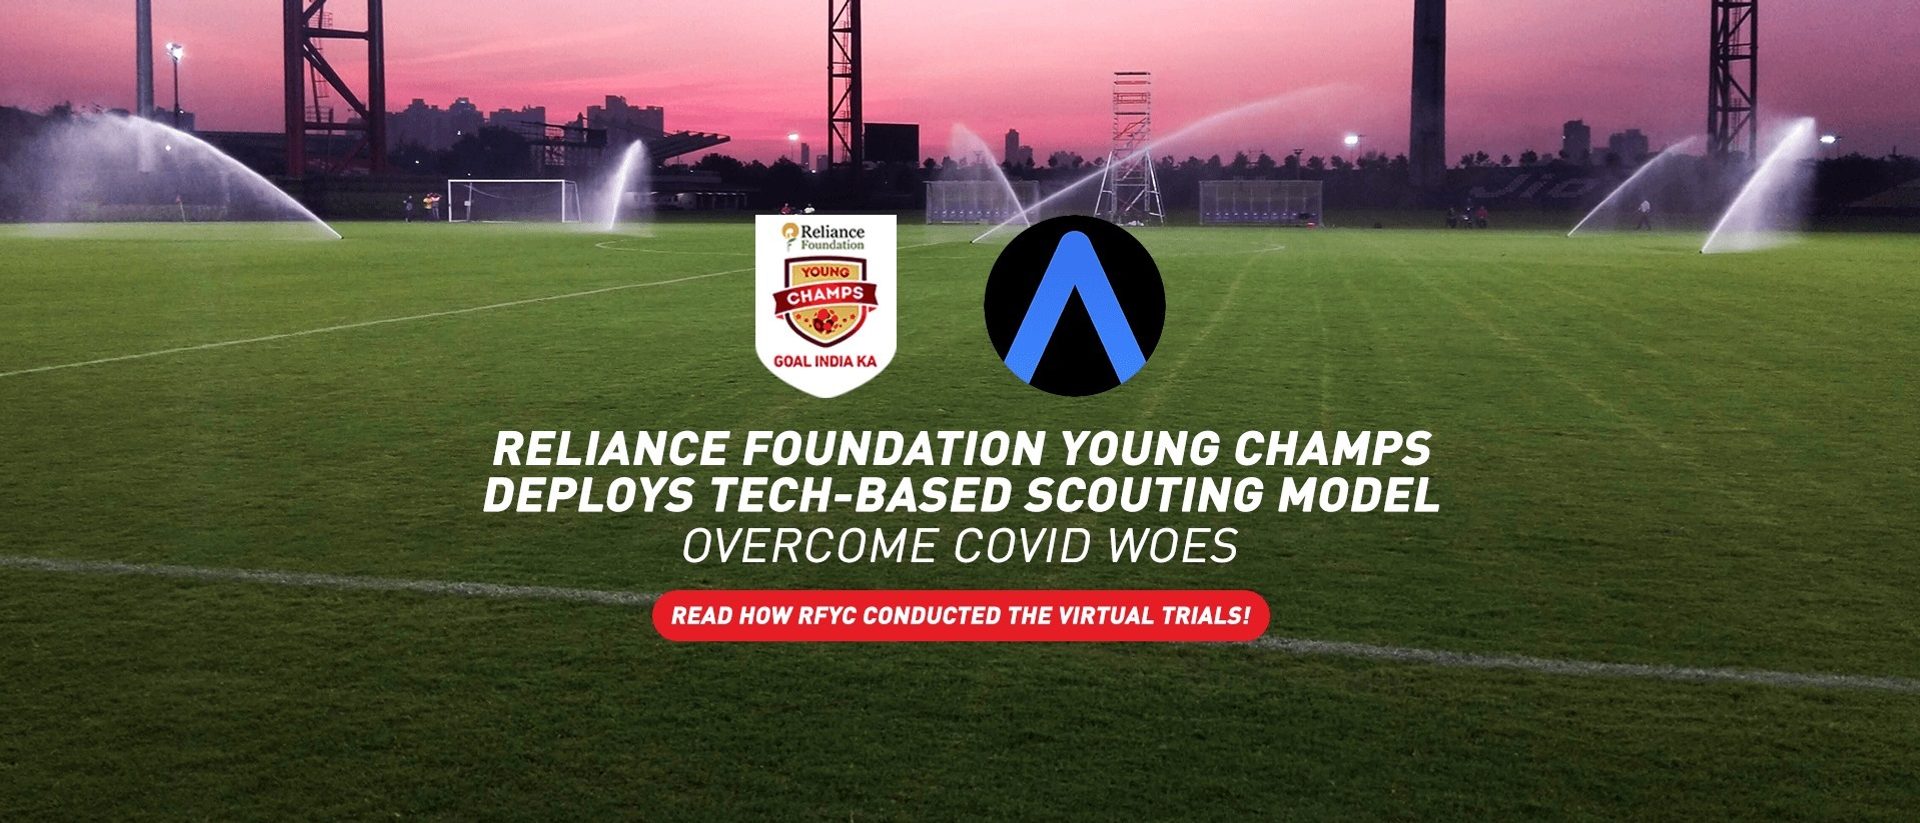 NIMBLE, SMARTER, TOGETHER: RFYC EMBRACE TECH SOLUTION TO SCOUT TALENT IN COVID TIMES 